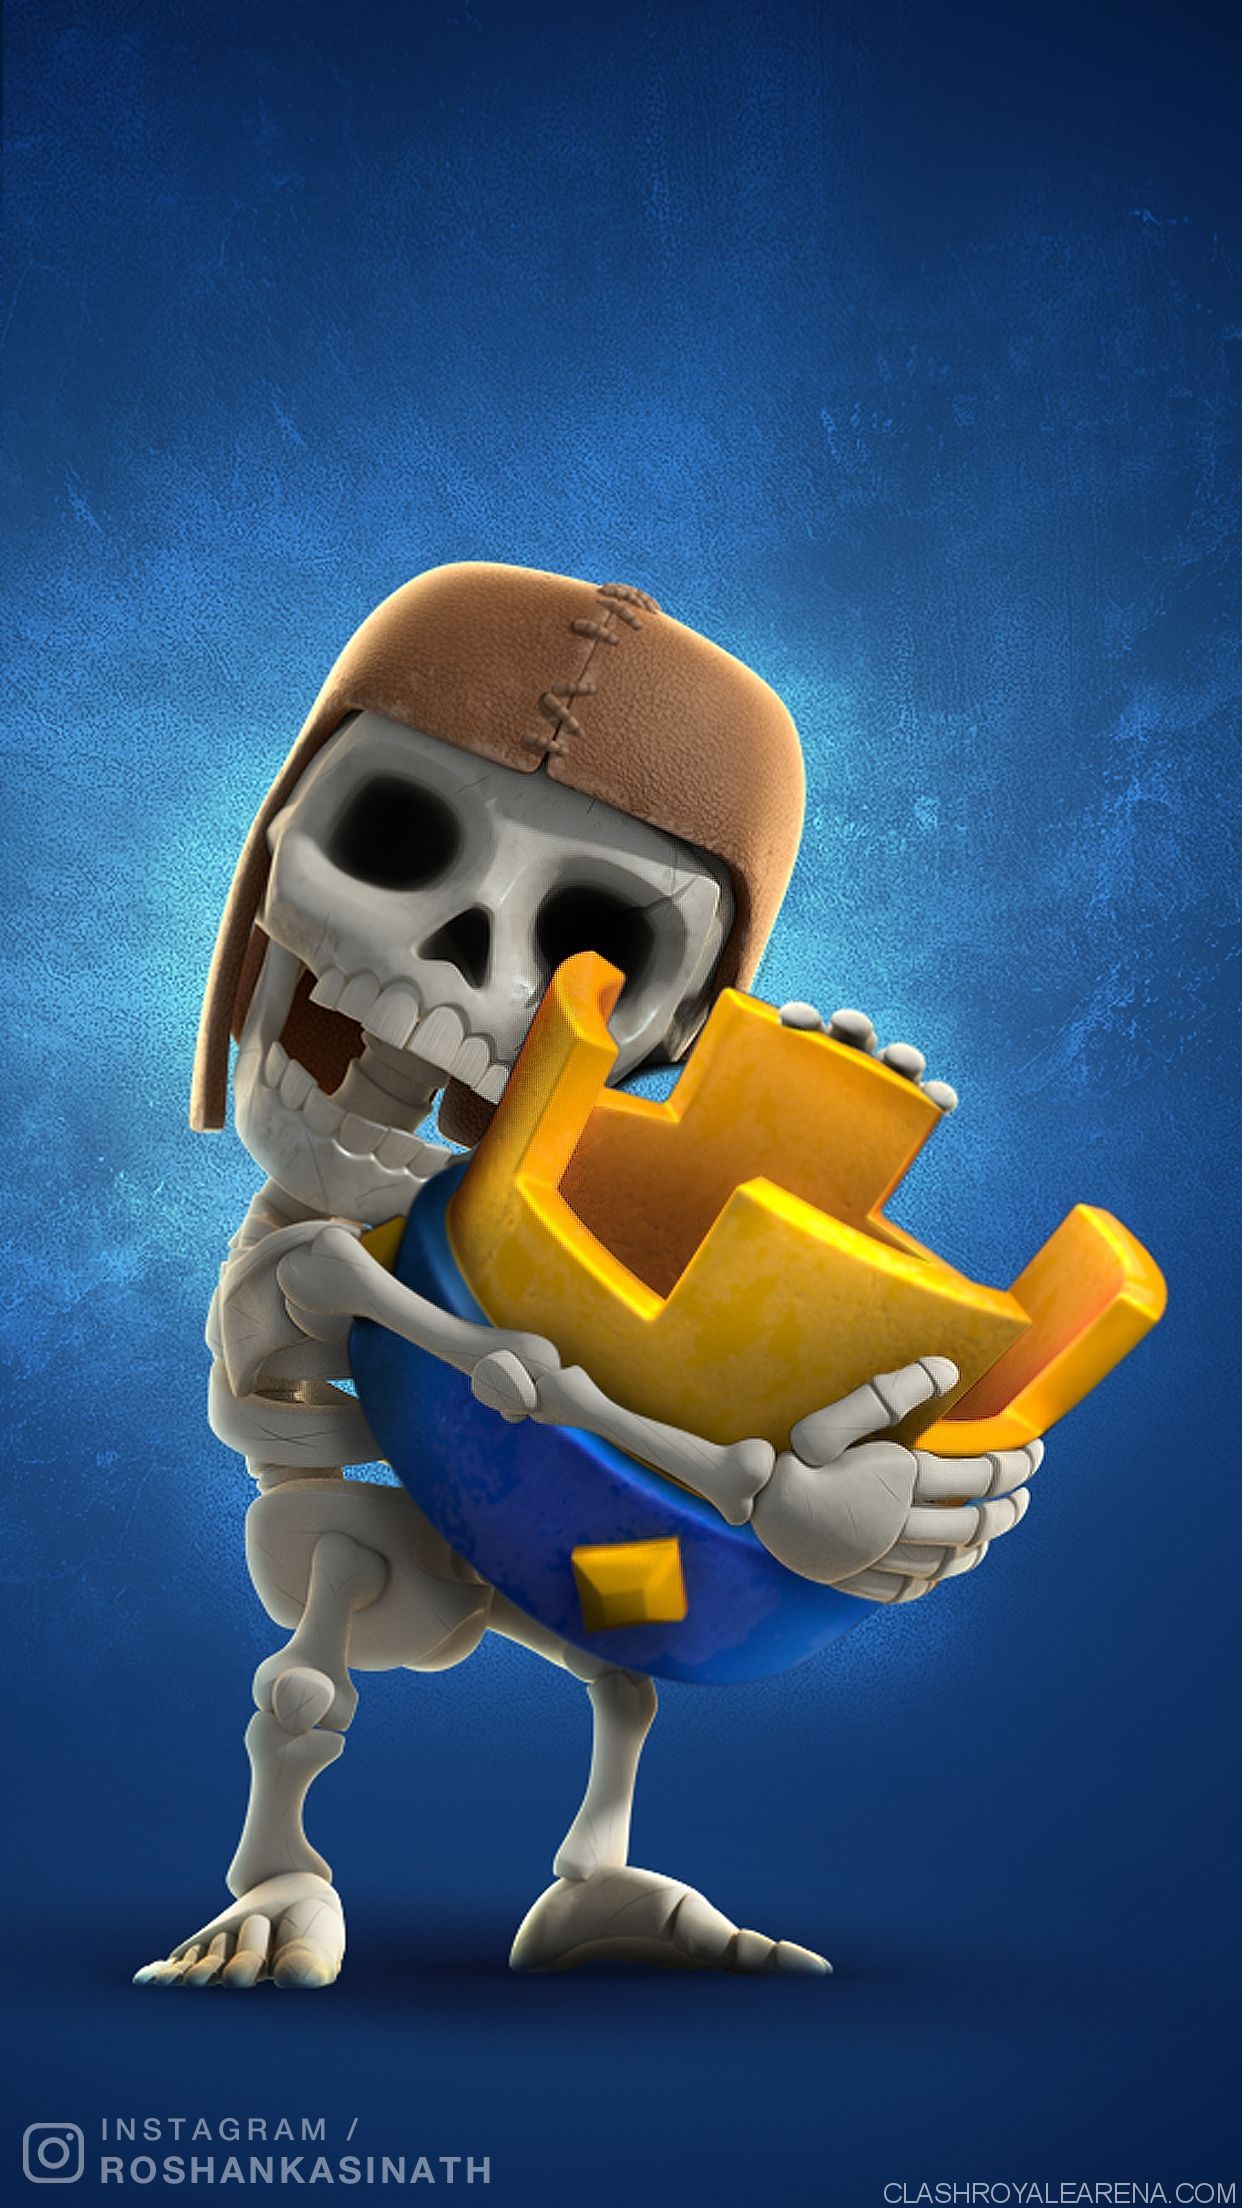 Clash Royale iPhone Wallpaper Free Clash Royale iPhone Background